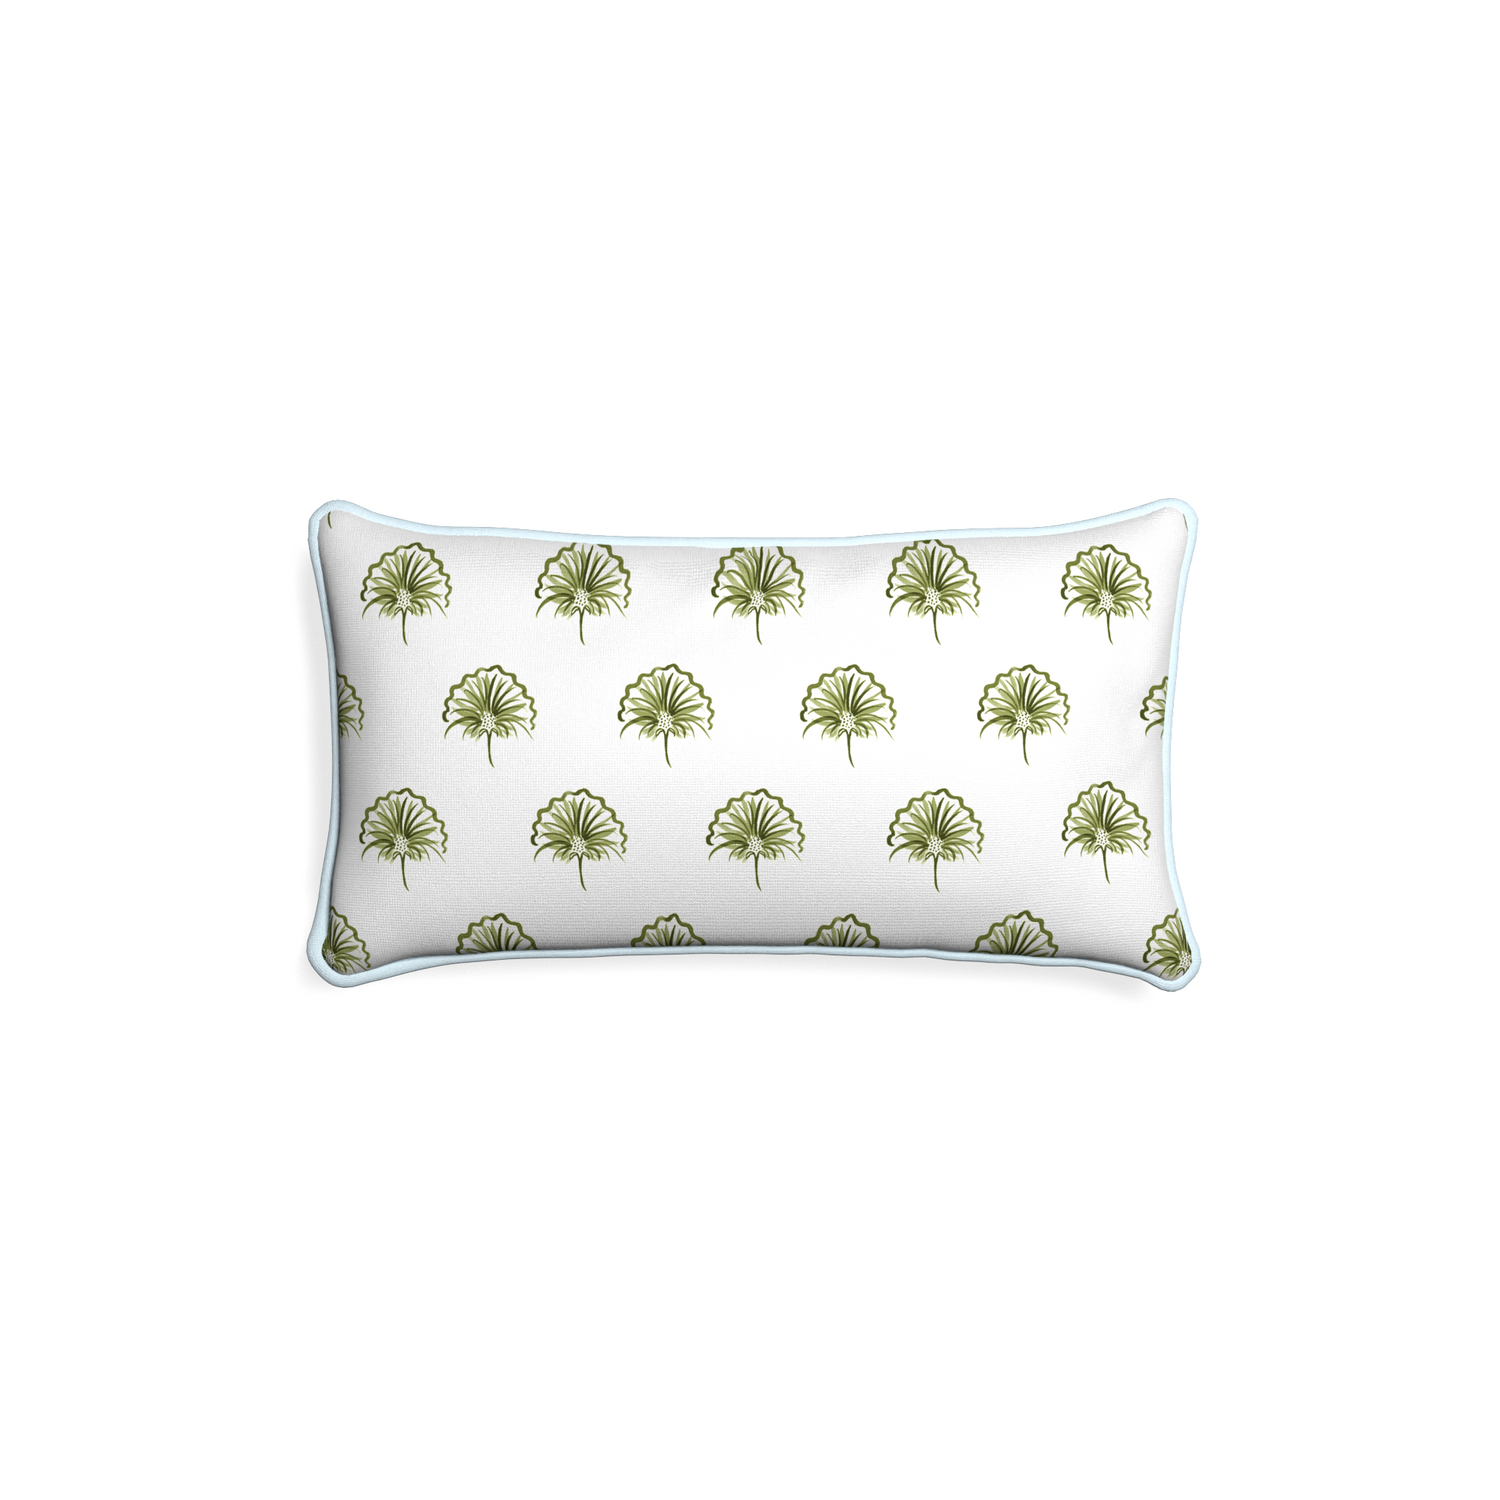 Petite-lumbar penelope moss custom green floralpillow with powder piping on white background